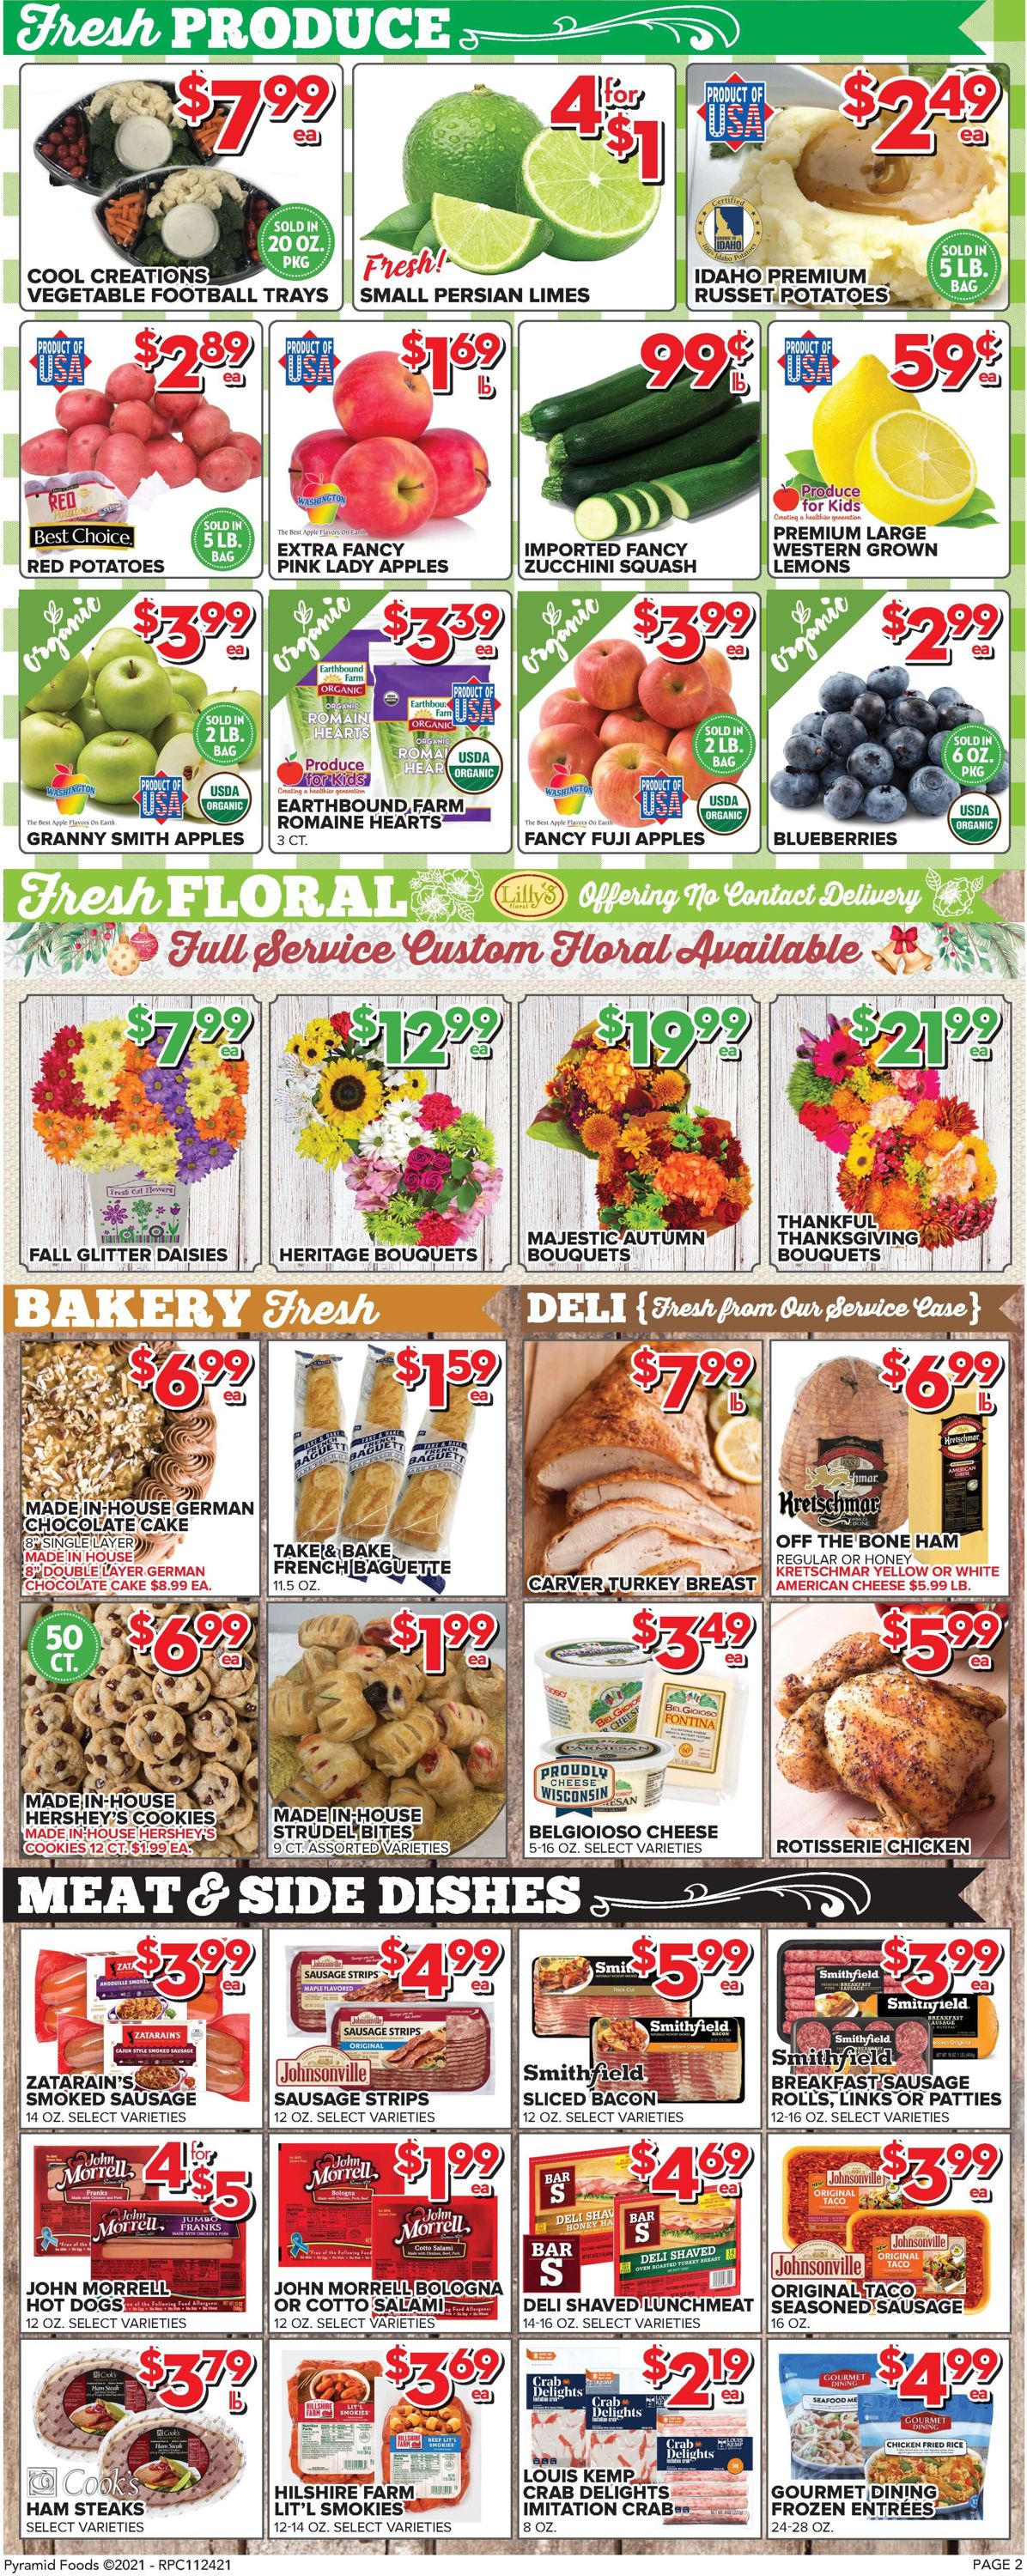 Price Cutter HOLIDAY 2021 Weekly Ad Circular - valid 11/24-11/30/2021 (Page 2)